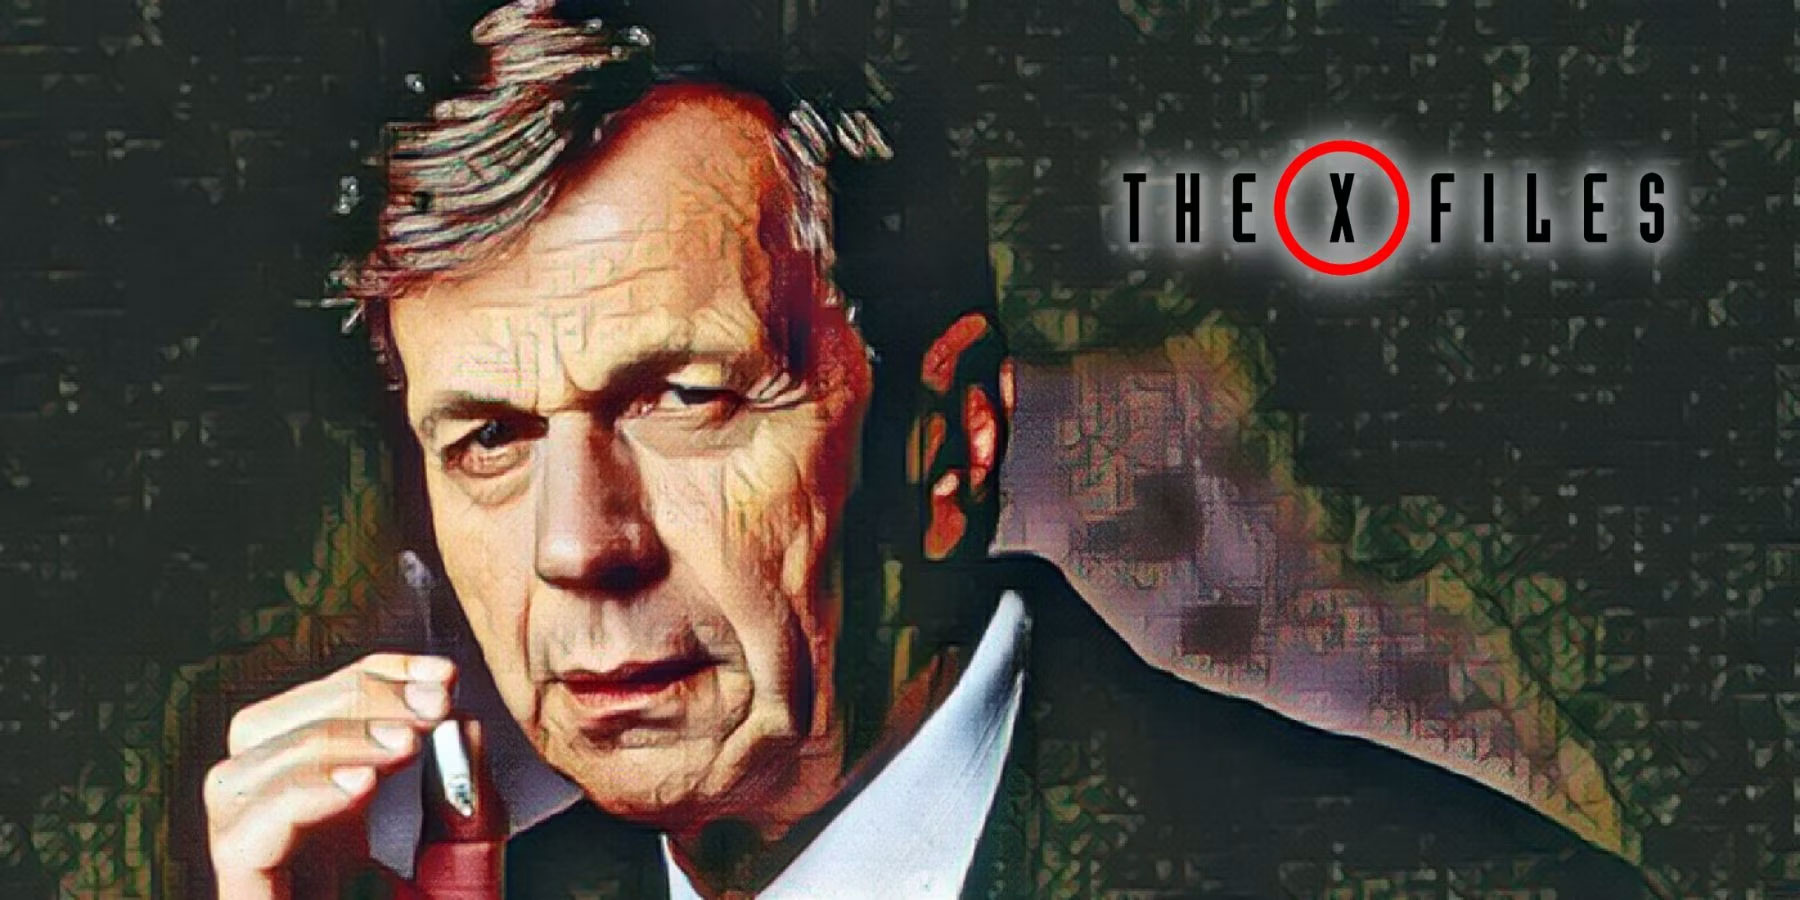 William B. Davis, the Cigarette Smoking Man from The X-Files